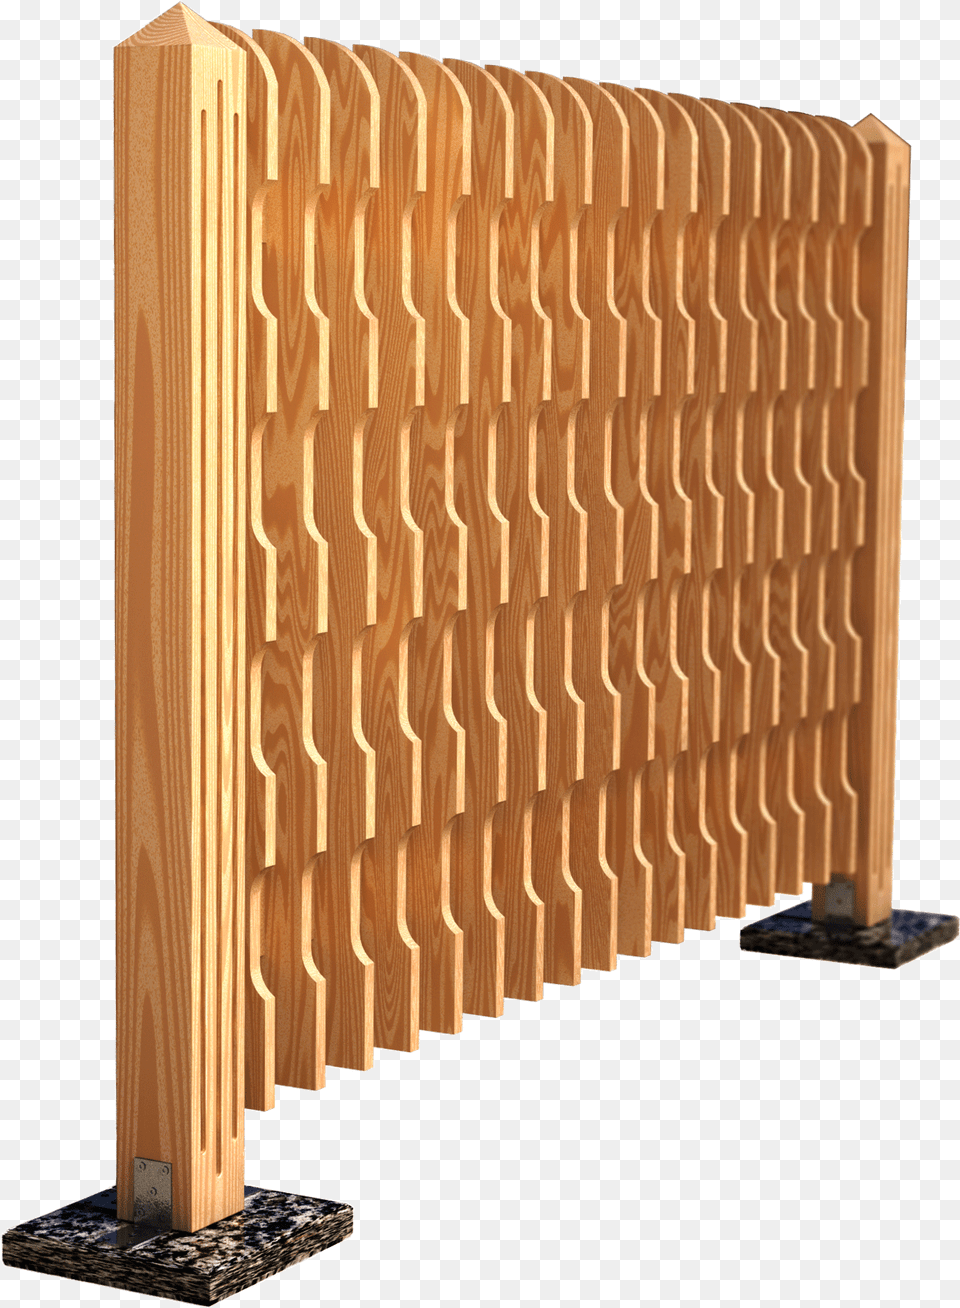 Wood Fence, Indoors, Interior Design, Plywood, Lumber Png Image